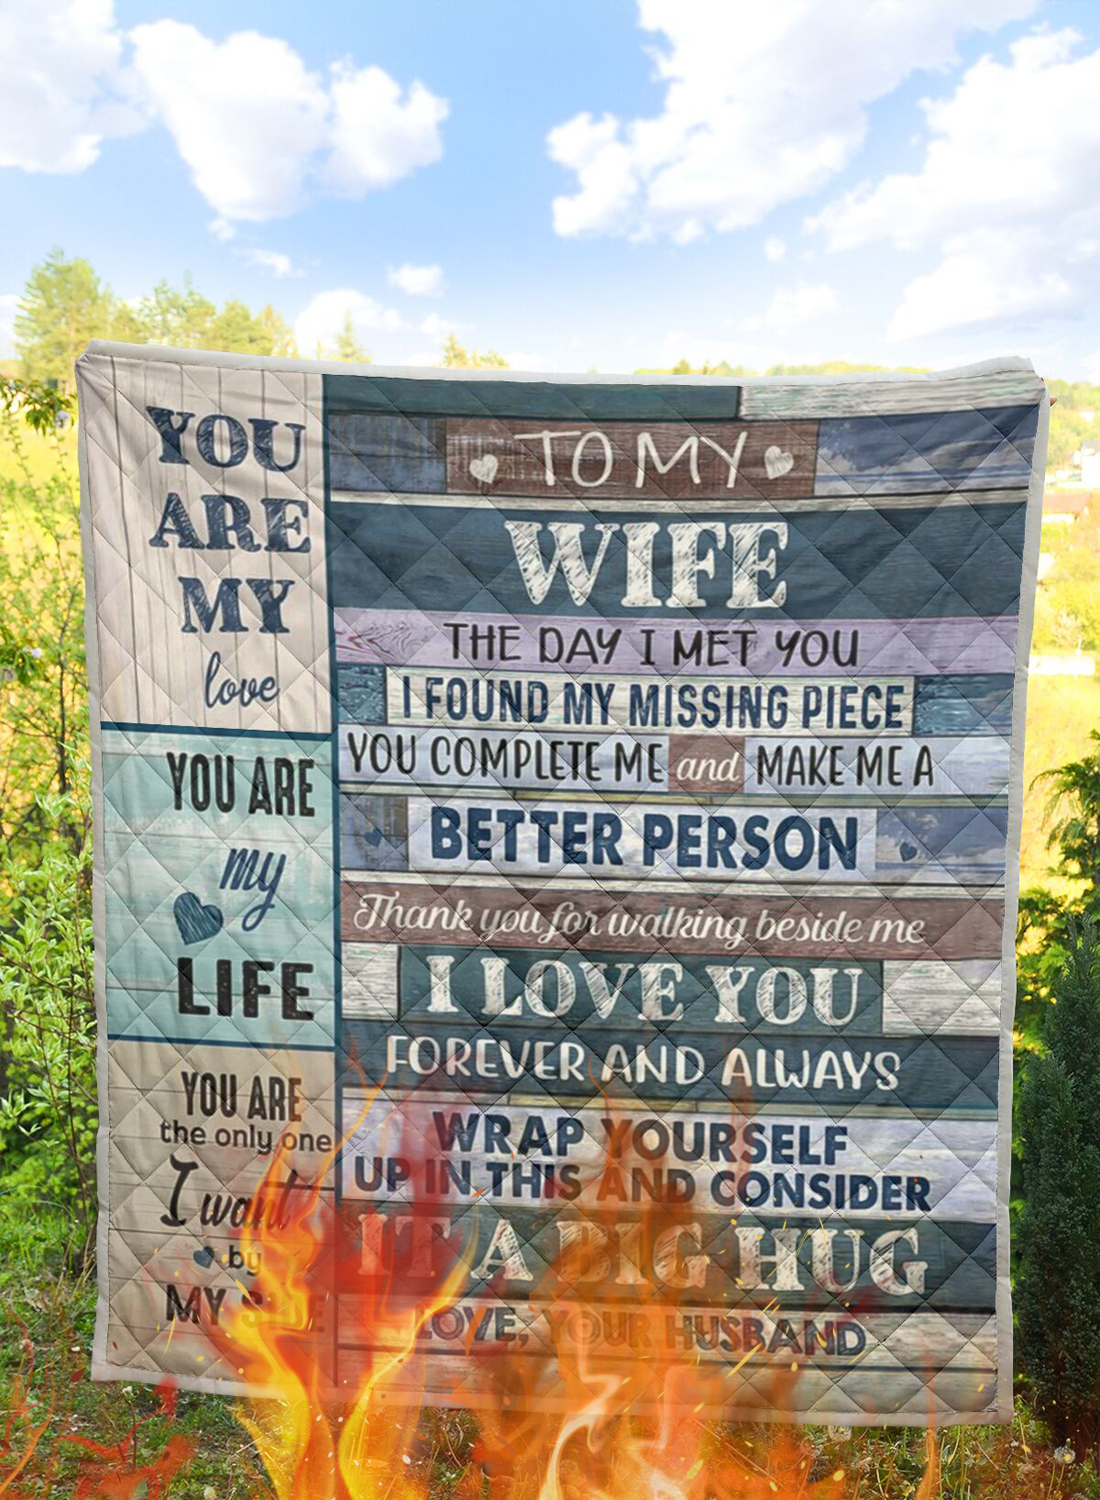 To my wife the day i met you quilt blanket – Hothot 241020